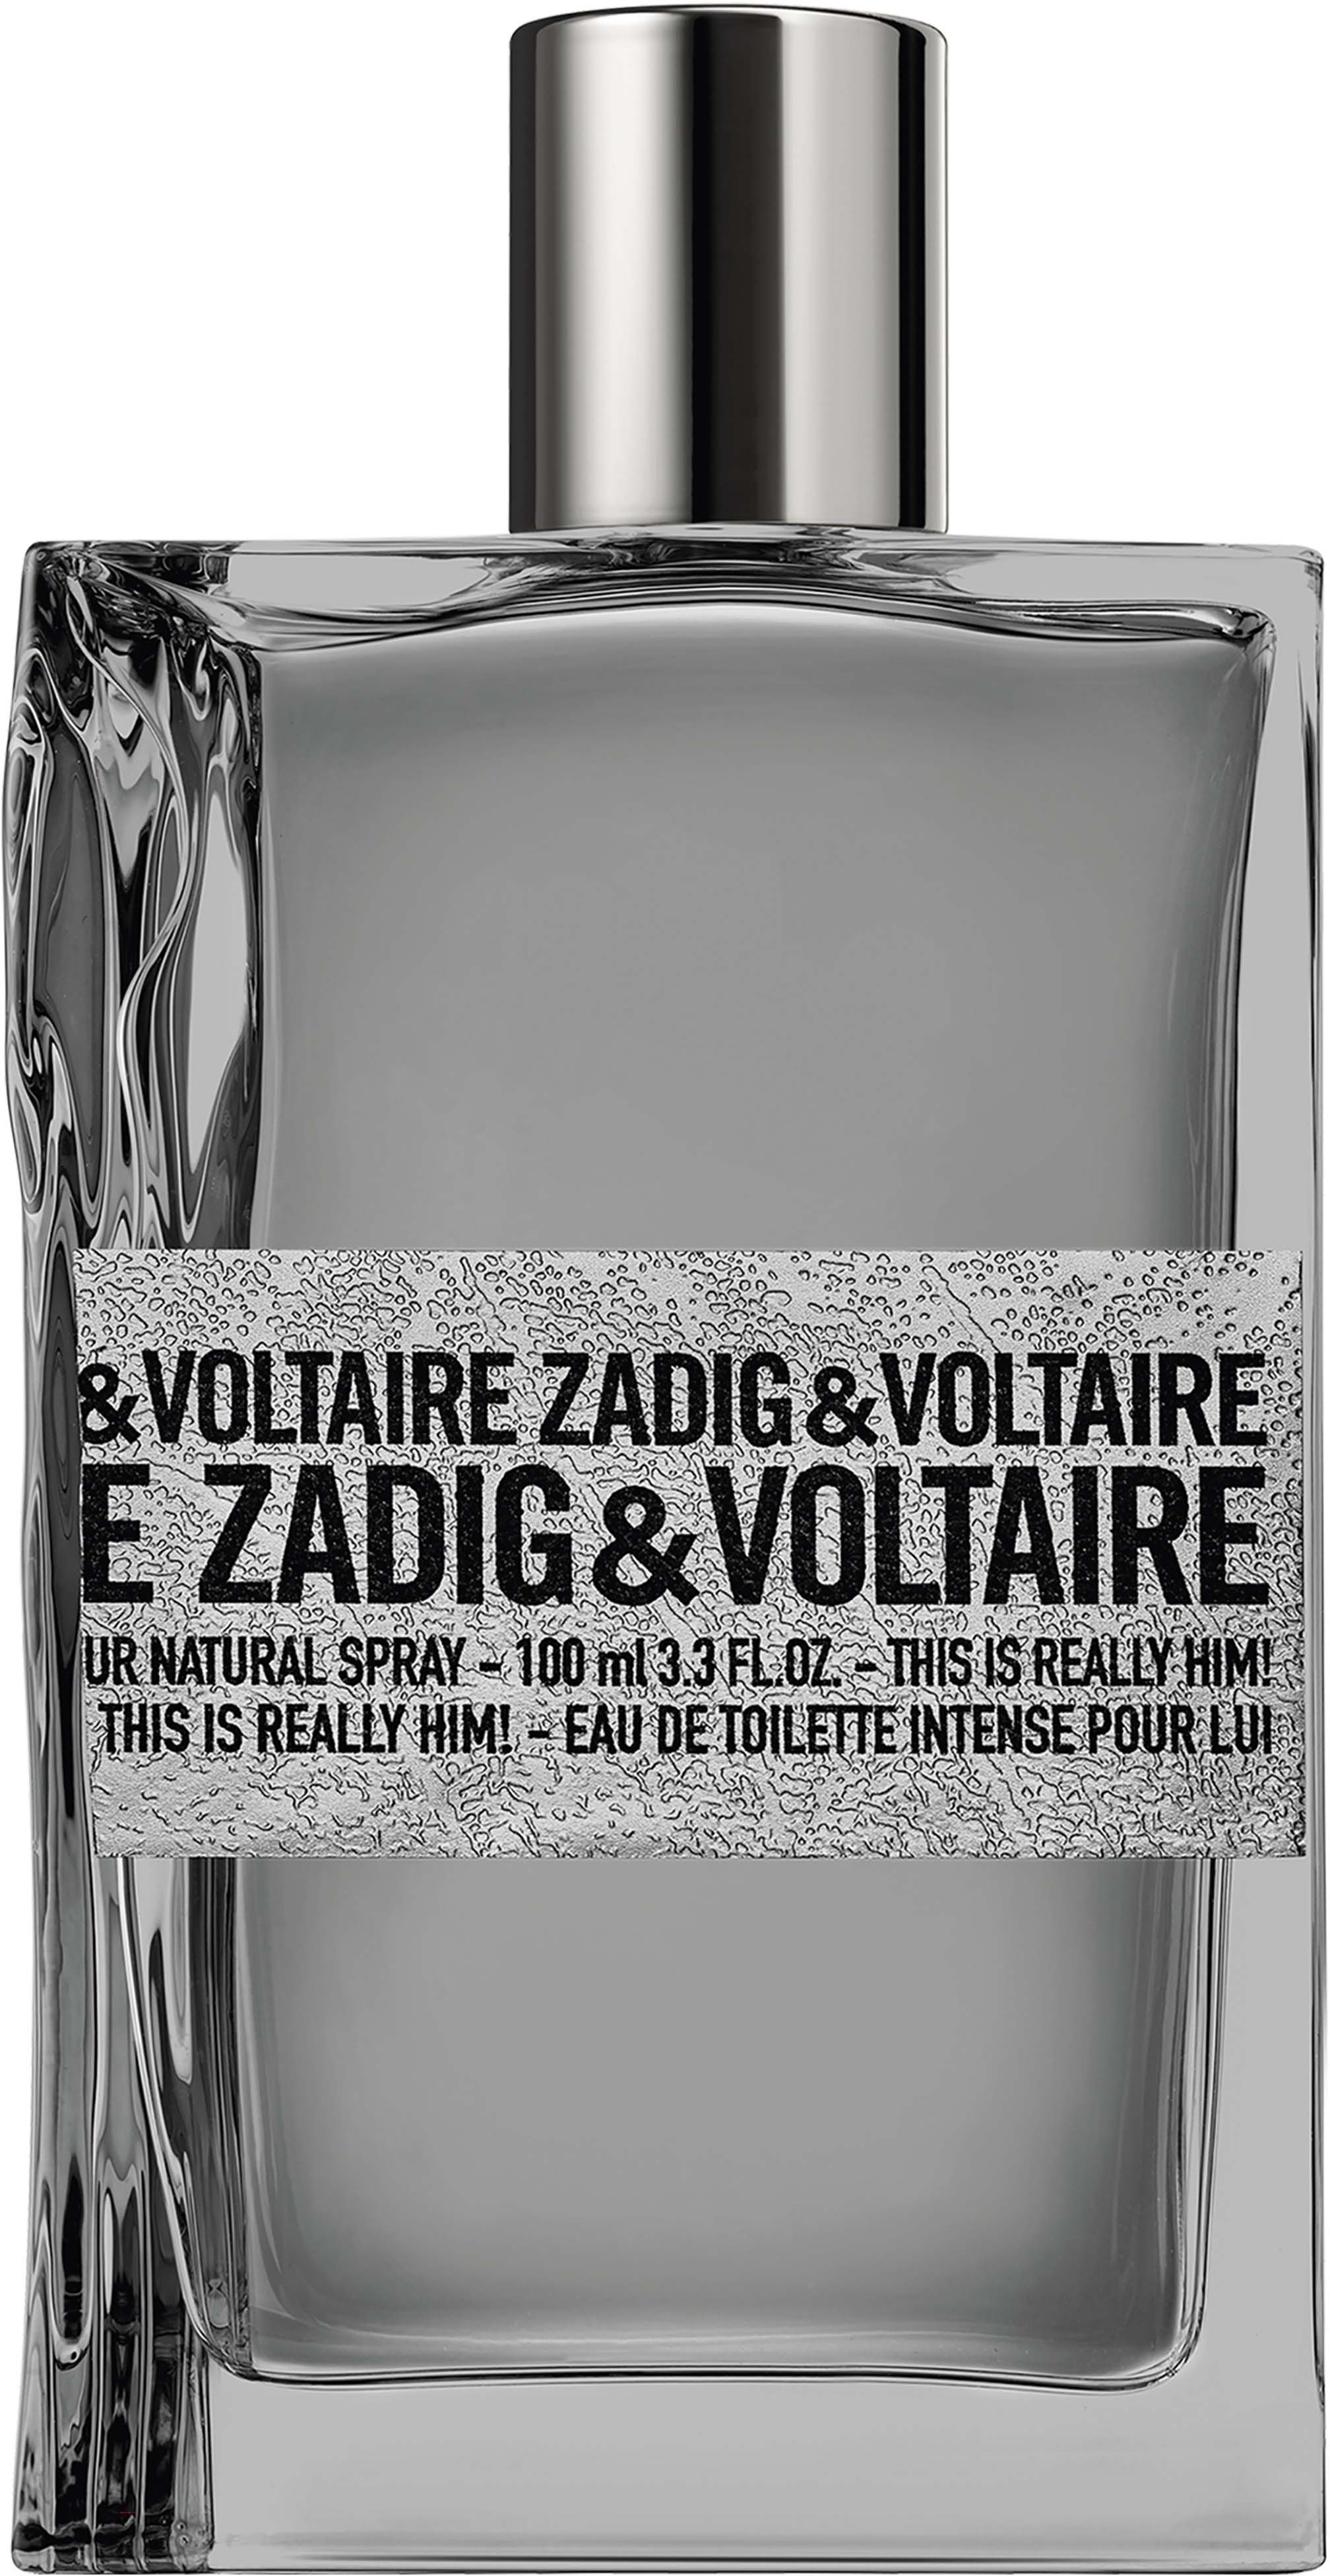 zadig & voltaire this is really him!